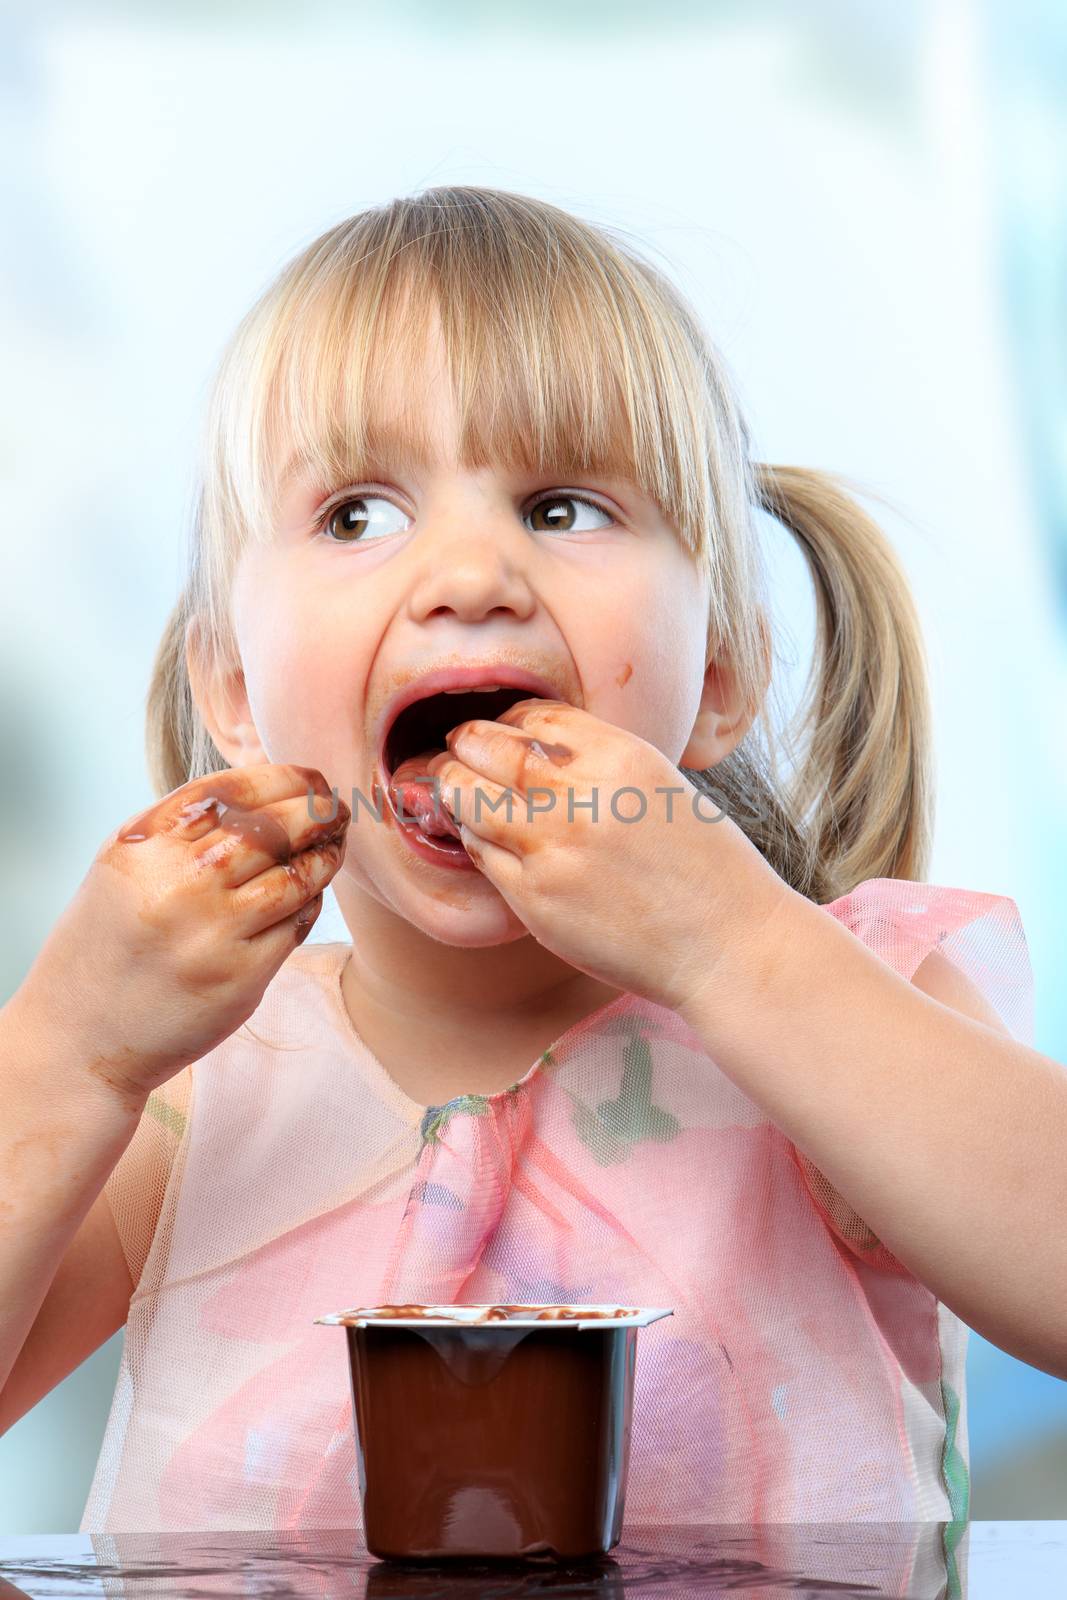 Close up portrait of cute infant eating chocolate yogurt with hands.Girl showing dirty face full of chocolate.